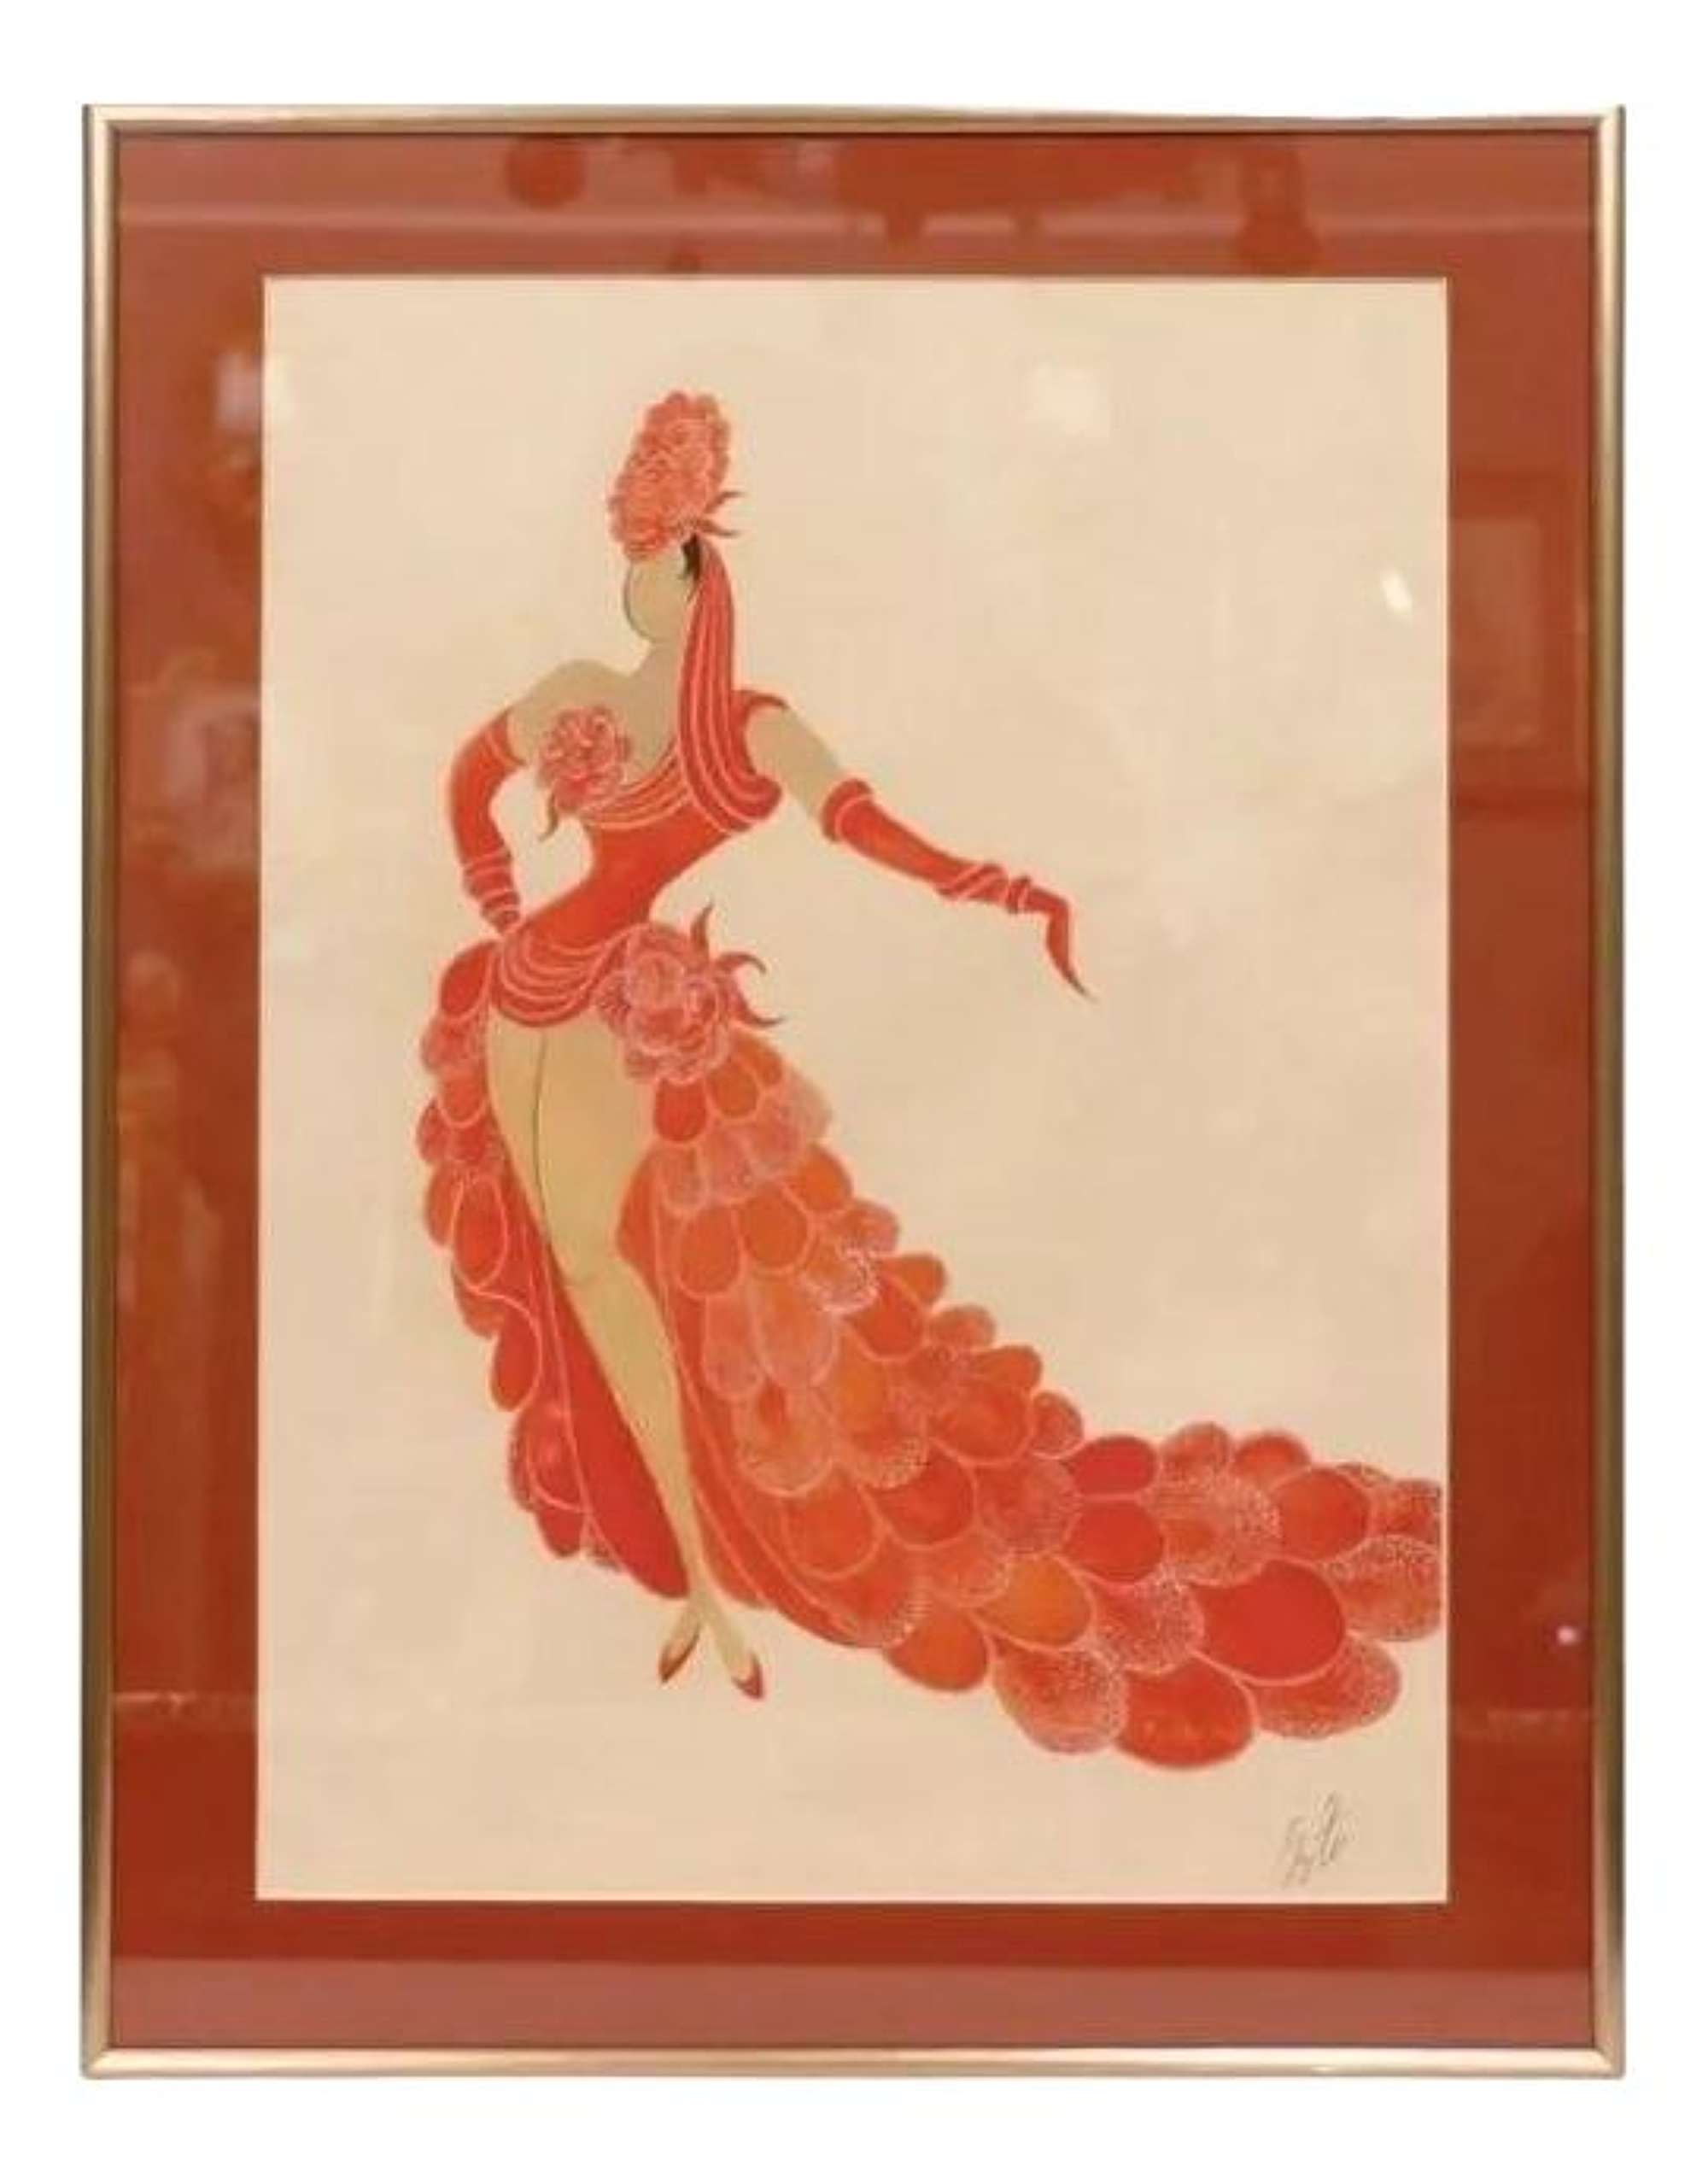 Erte, Stage Costumes Series Illustration, 1990s, Mixed Media on Paper, Framed